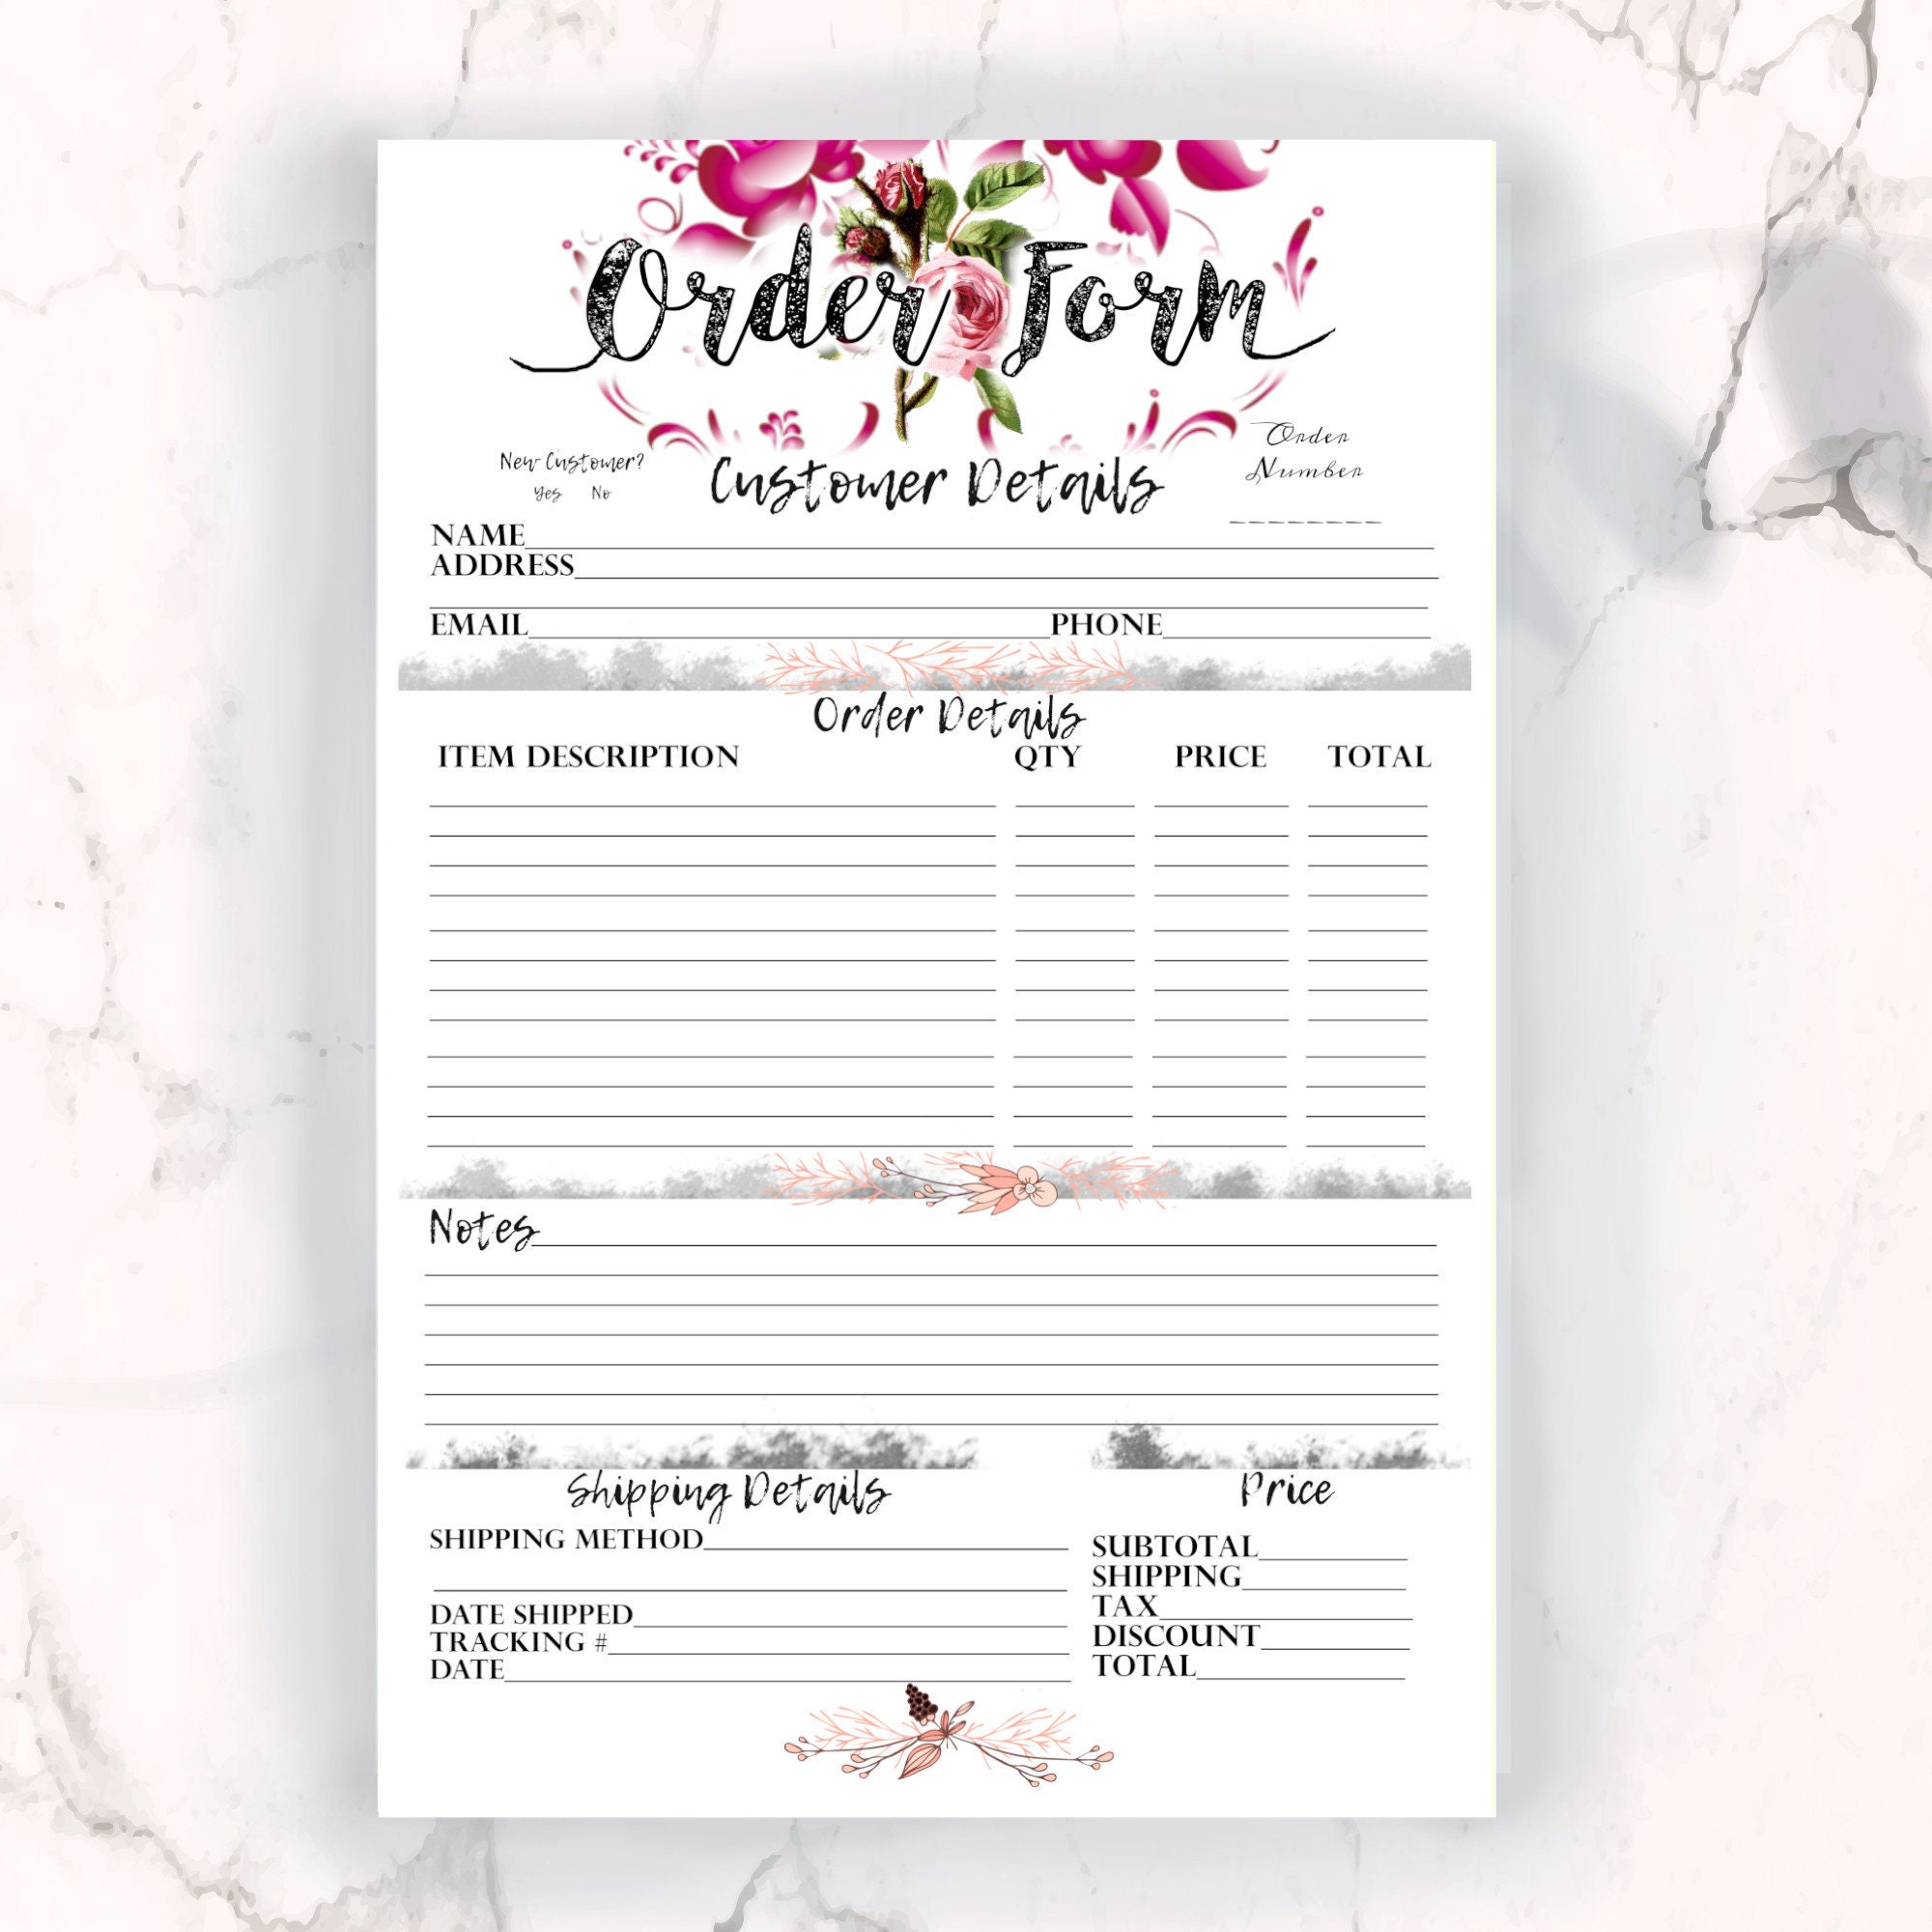 Downloadable Free Printable Order Forms For Crafts